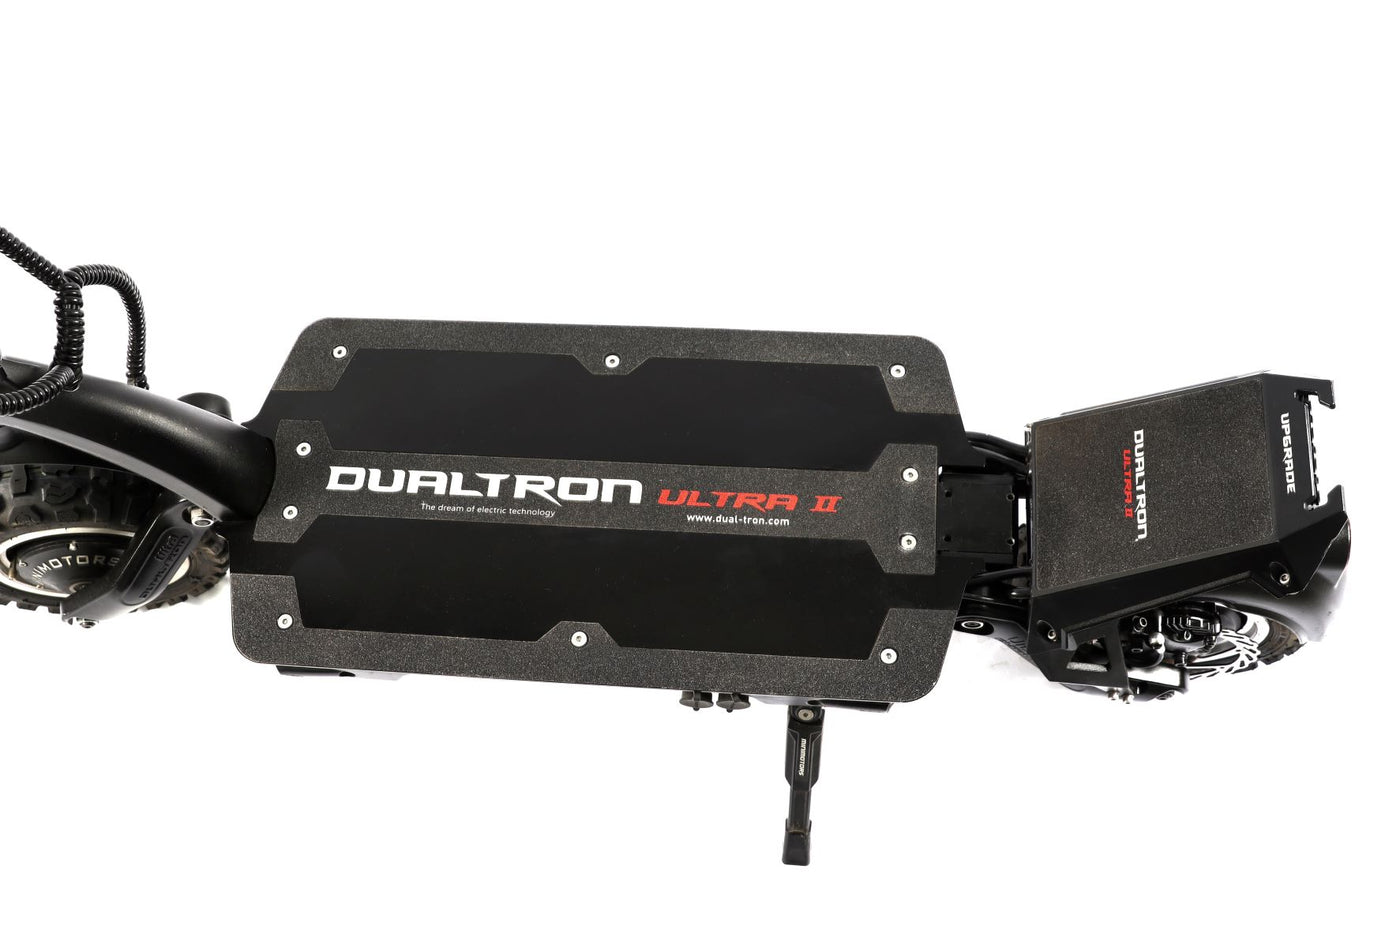 Dualtron Ultra2 Upgrade – Ey4 Throttle ($500/month for 12 months)